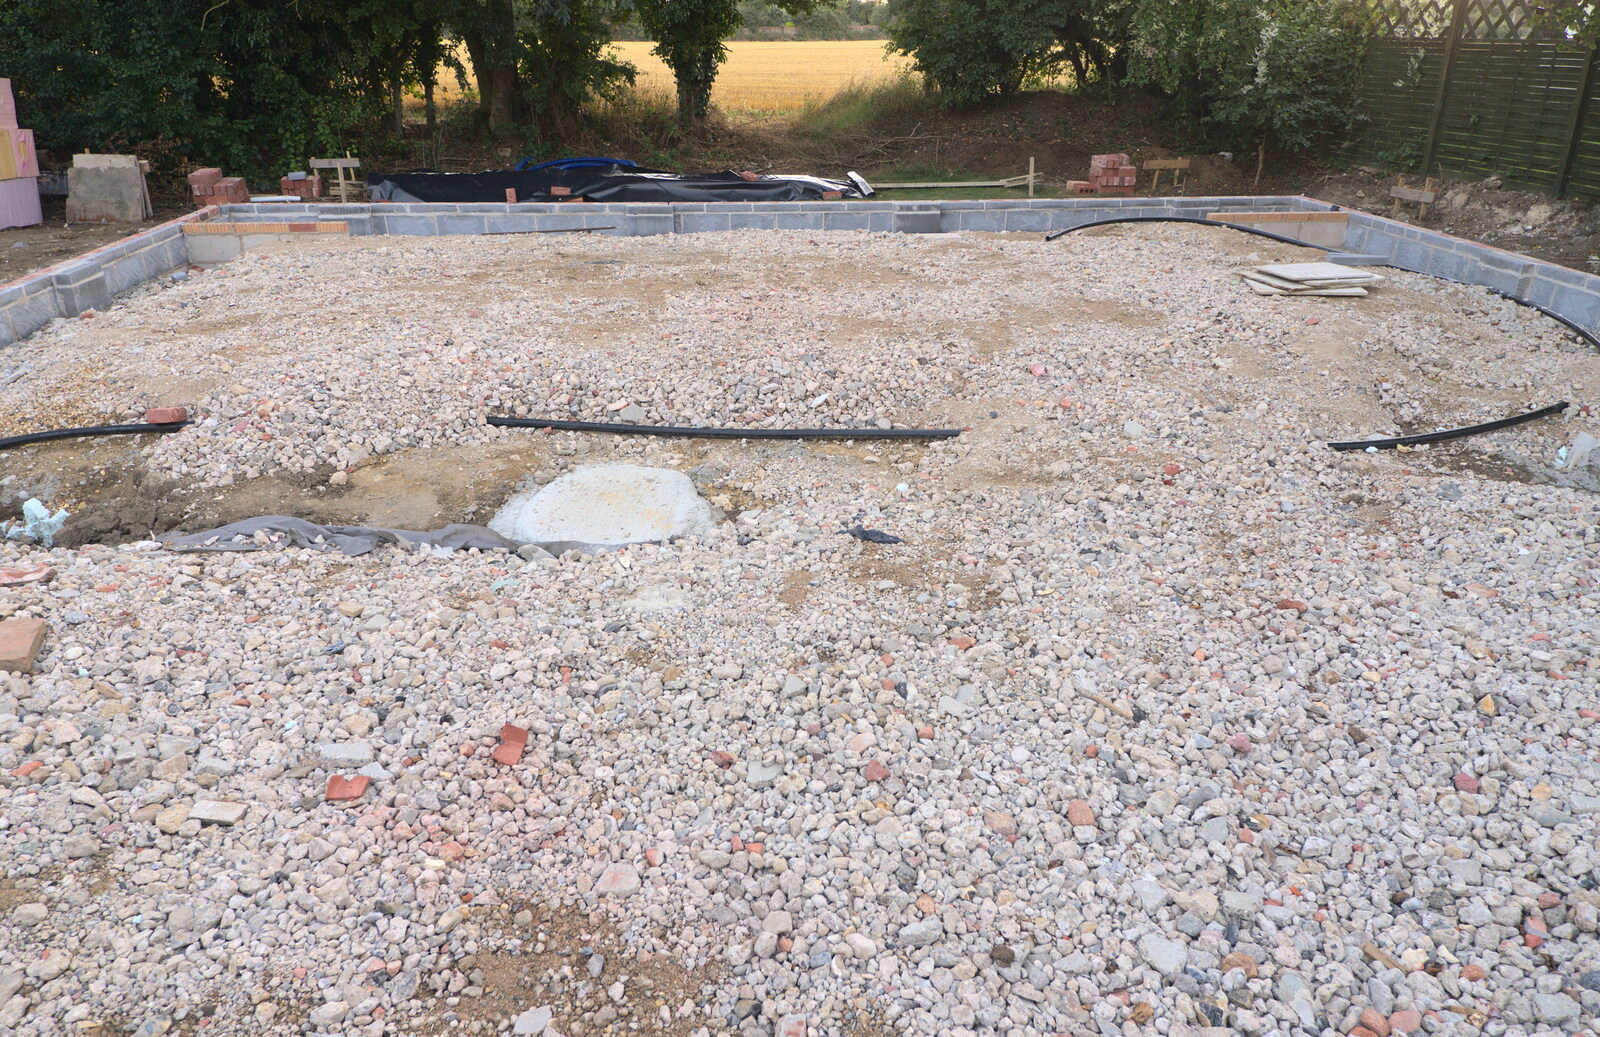 The base of the new garage from Bressingham Gardens, and Building Progress, Brome, Suffolk - 26th August 2013